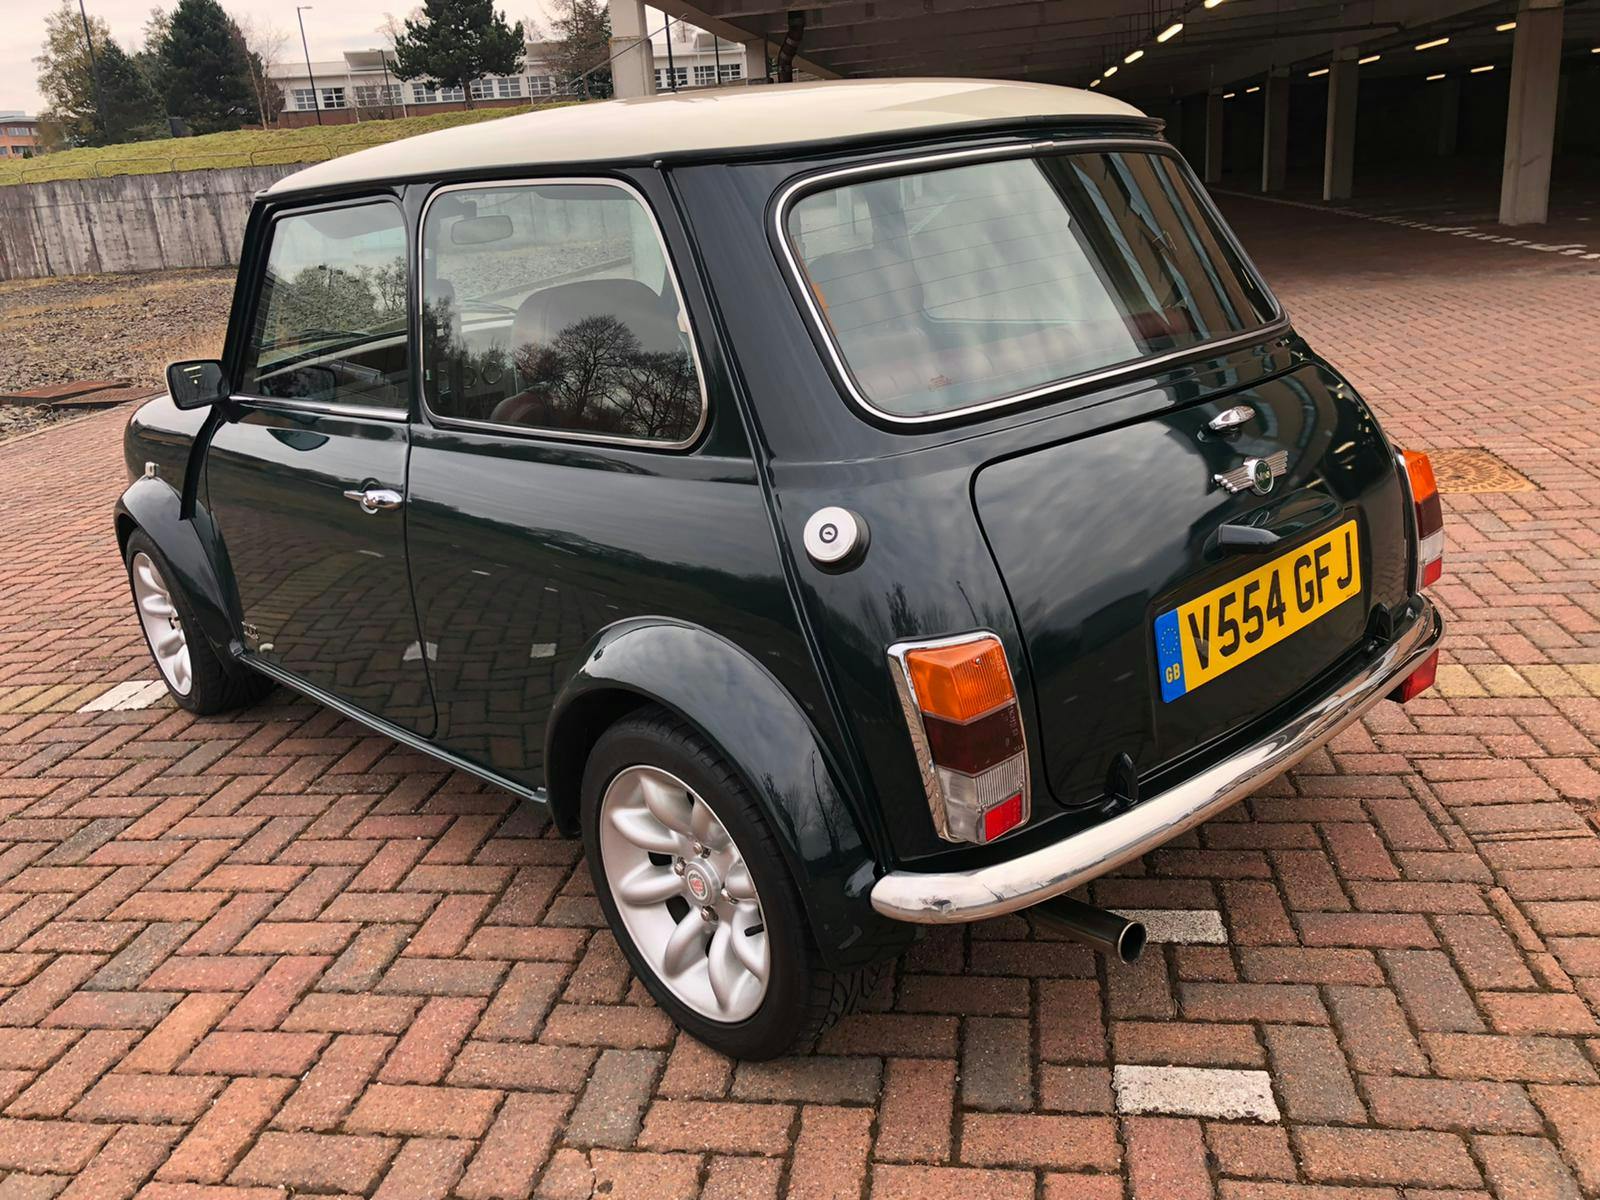 1999 ROVER MINI COOPER LE for sale by auction in Glasgow, United Kingdom